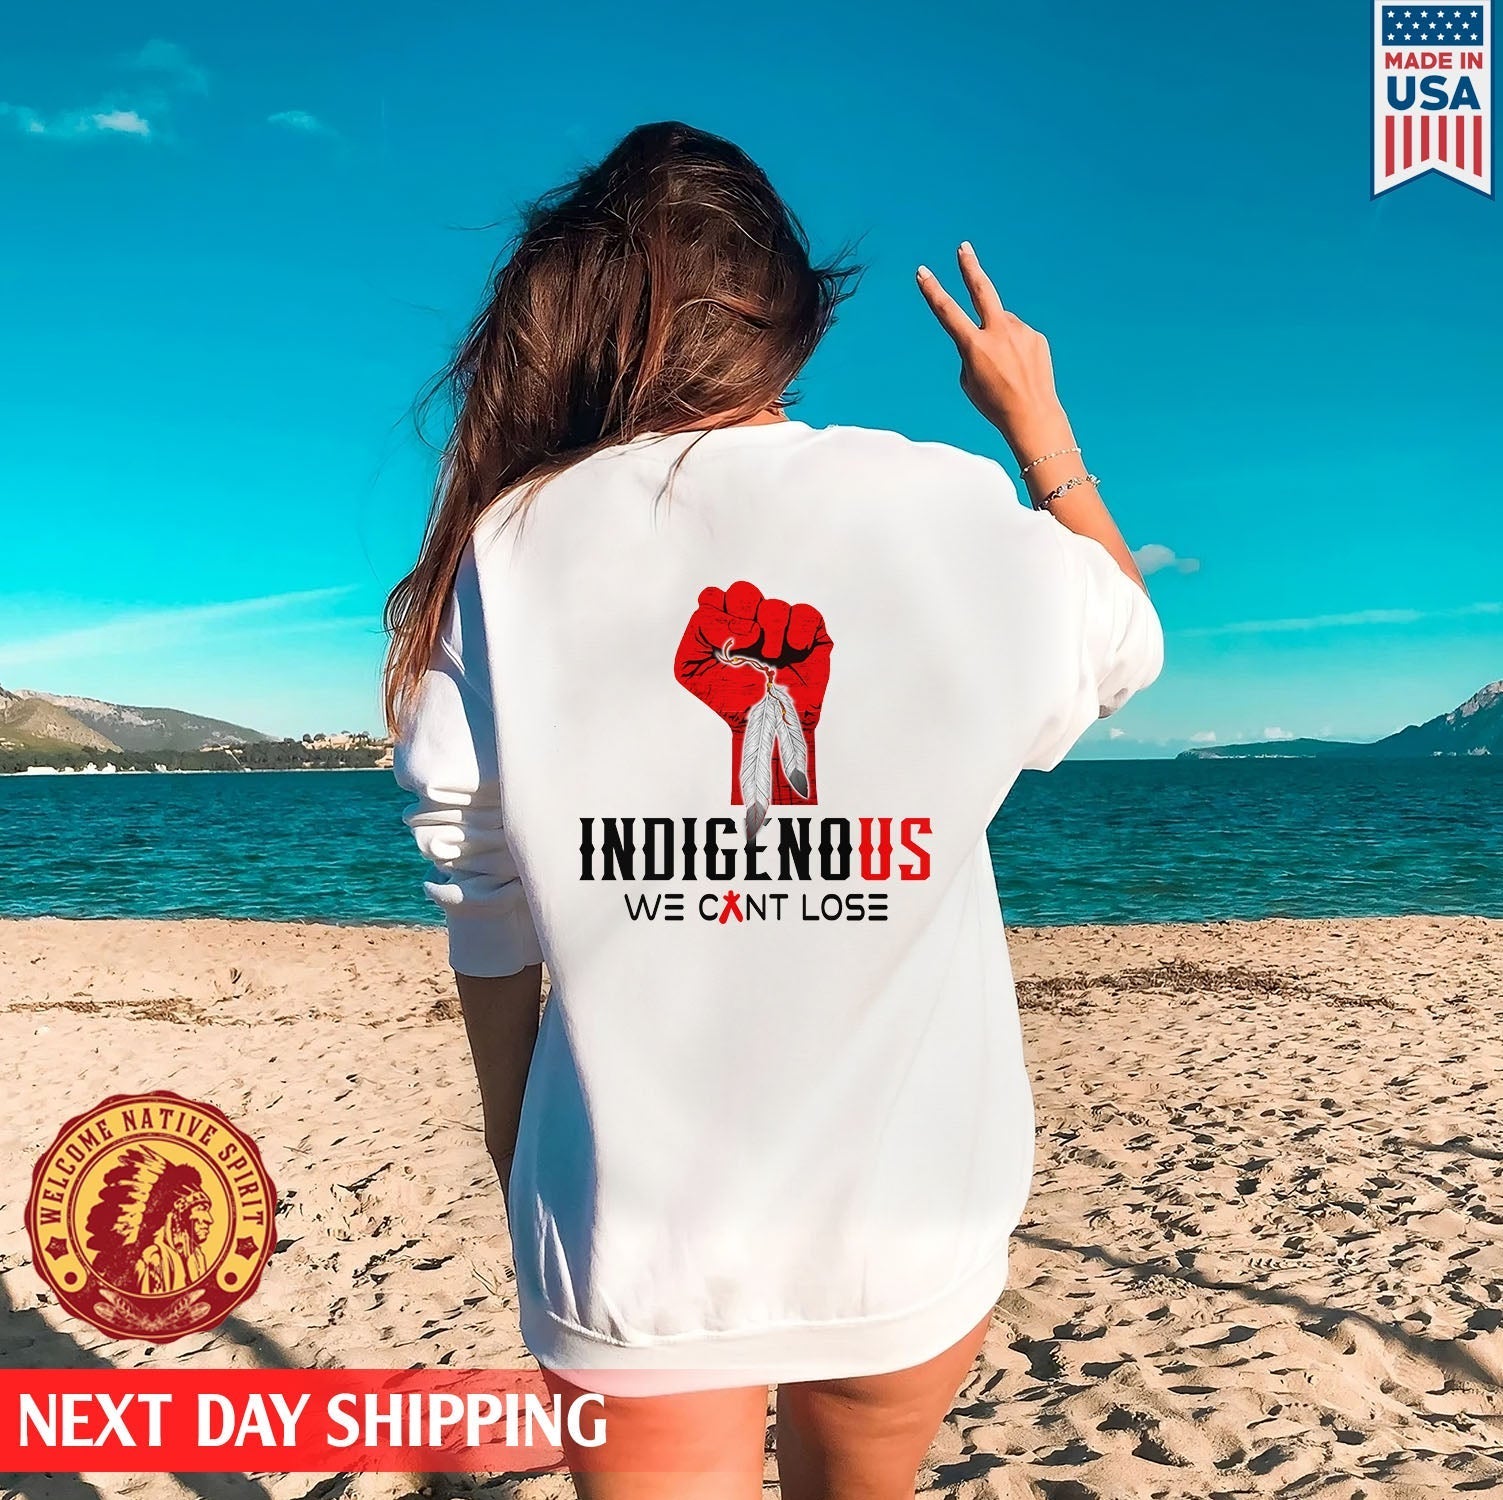 Indigenous We Can't Lose Red Hand Native American Unisex Back T-Shirt/Hoodie/Sweatshirt